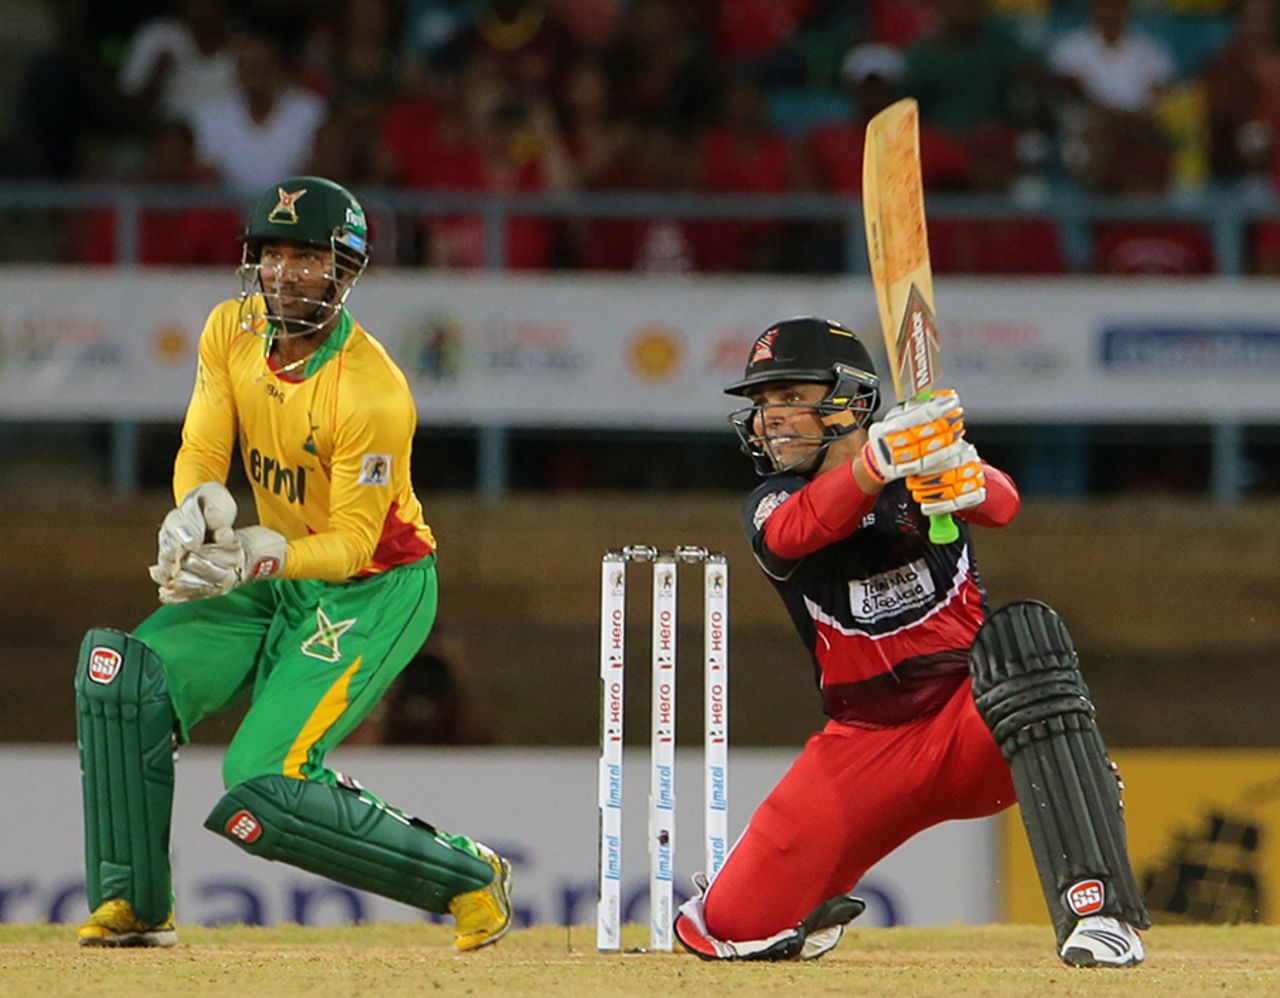 Kamran Akmal's Man-of-the-Match winning 49 set up Red Steel's chase, Trinidad & Tobago Red Steel v Guyana Amazon Warriors, CPL 2015, 2nd semi-final, Port-of-Spain, July 25, 2015